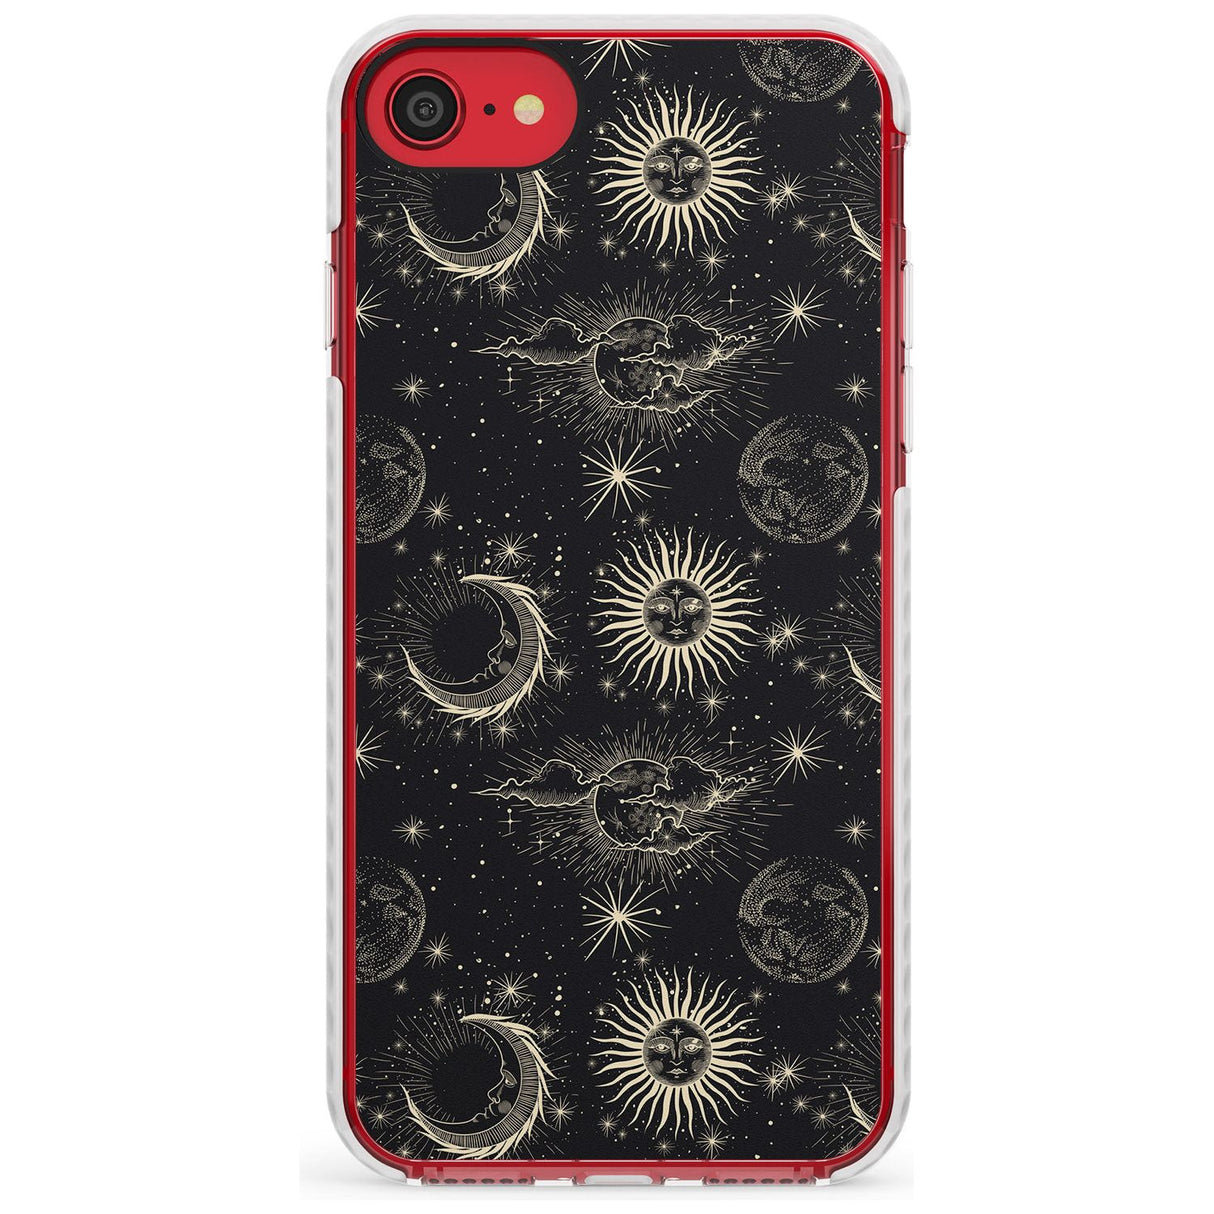 Large Suns, Moons & Clouds Slim TPU Phone Case for iPhone SE 8 7 Plus